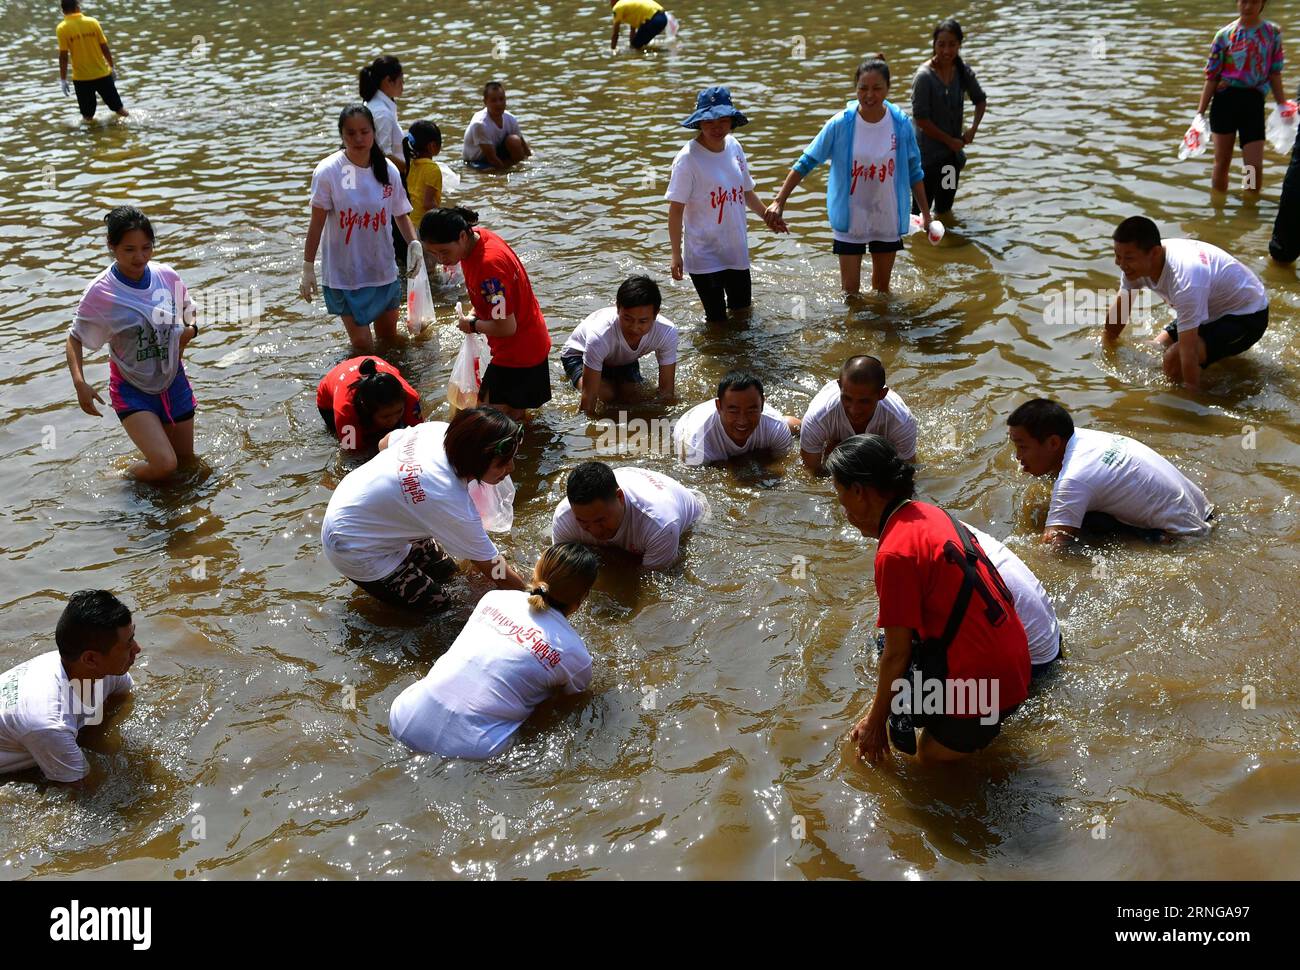 ENSHI, Sept. 16, 2016 -- Local people fumble to catch fish by hands in a river to celebrate a good harvest in Xuanen County, central China s Hubei Province, Sept. 16, 2016. ) (cxy) CHINA-HUBEI-FISH CATCHING (CN) SongxWen PUBLICATIONxNOTxINxCHN   Enshi Sept 16 2016 Local Celebrities fumble to Catch Fish by Hands in a River to Celebrate a Good Harvest in Xuanen County Central China S Hubei Province Sept 16 2016 Cxy China Hubei Fish Catching CN SongxWen PUBLICATIONxNOTxINxCHN Stock Photo